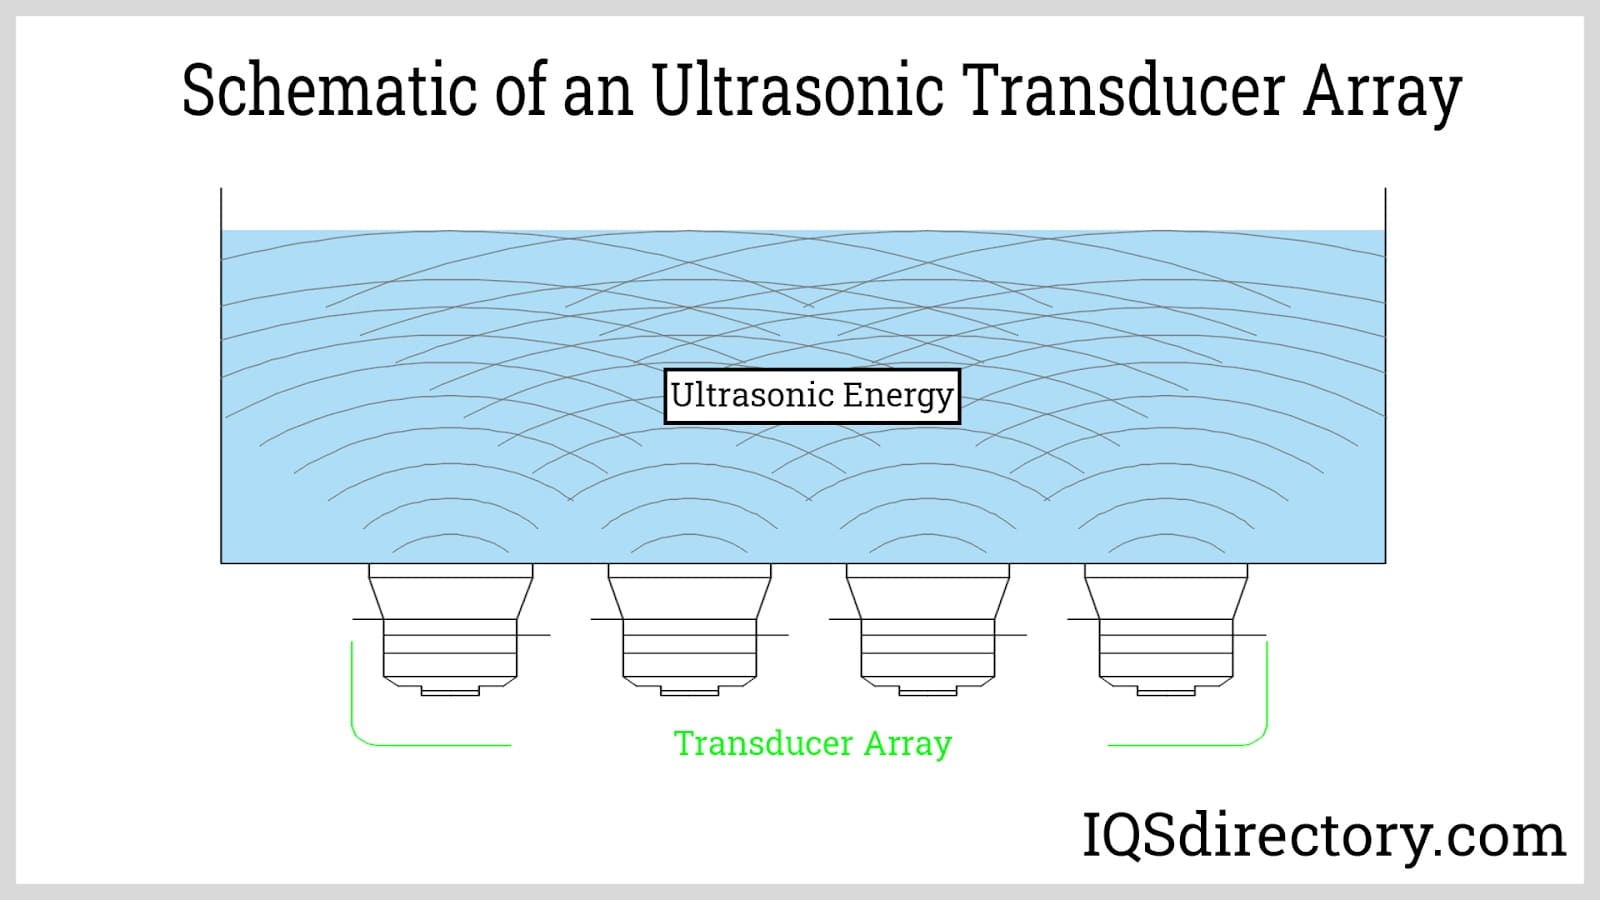 Schematic of a Ultrasonic Transducer Array